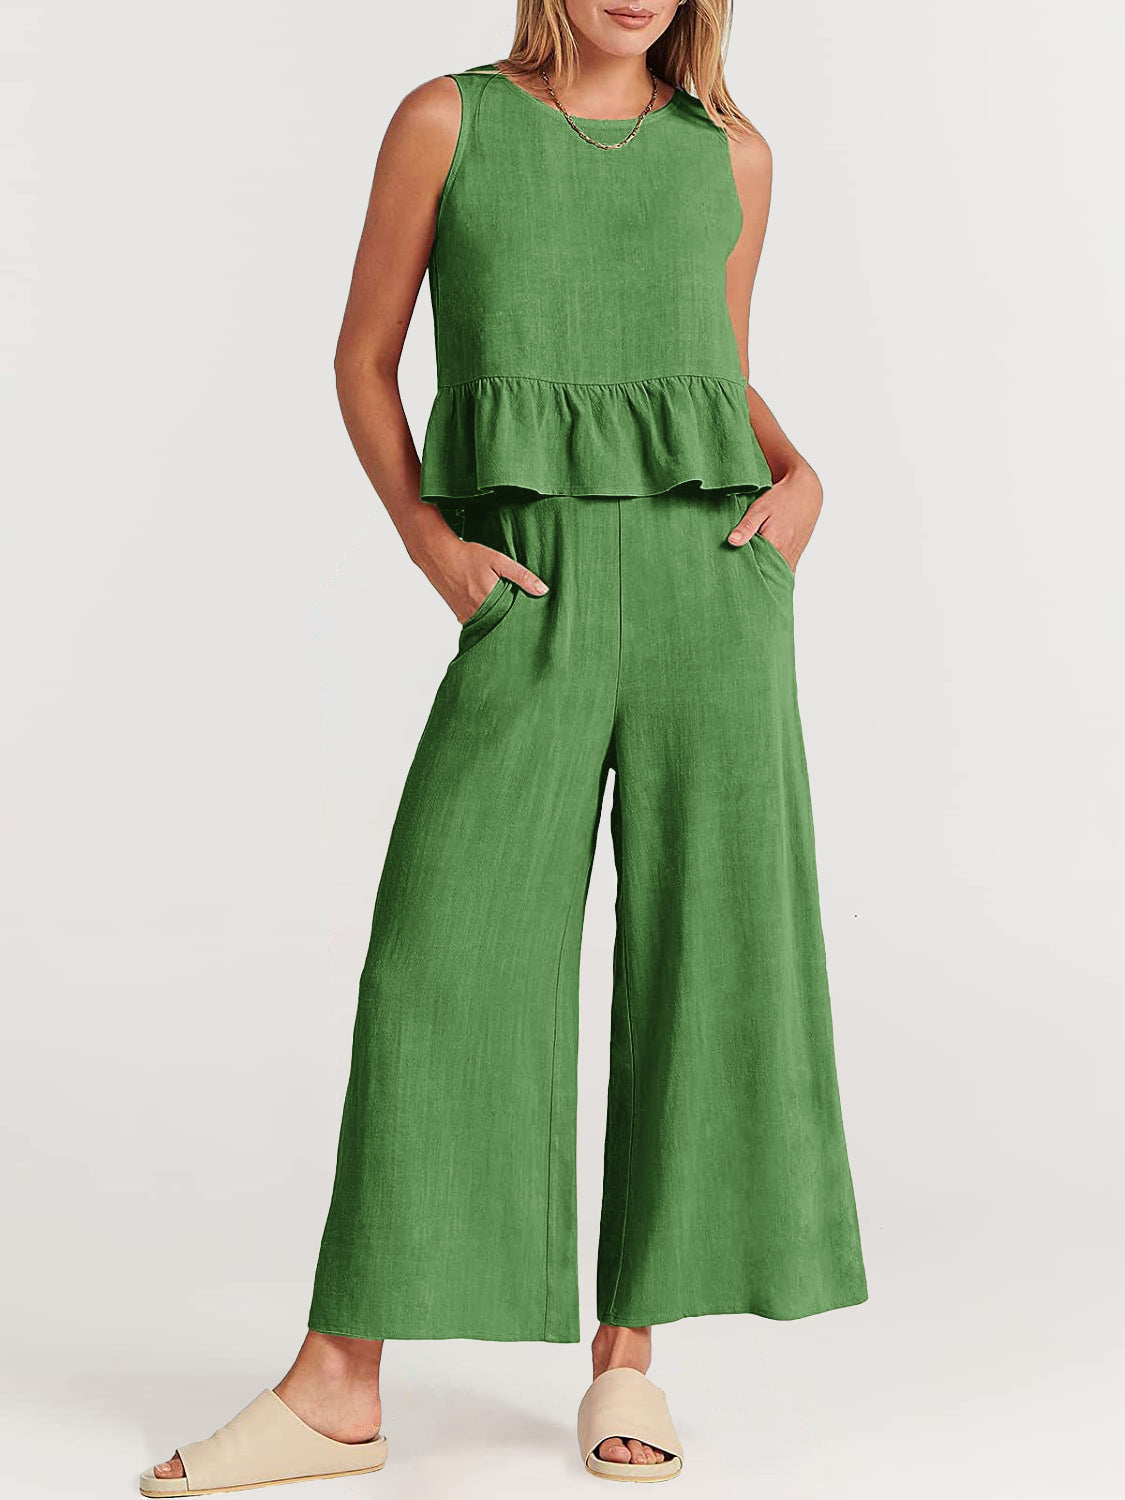 NTG Fad Two Pieces Sets Green / S(4-6) Two Piece Outfits Sleeveless Top and Wide Leg Pants Lounge Set